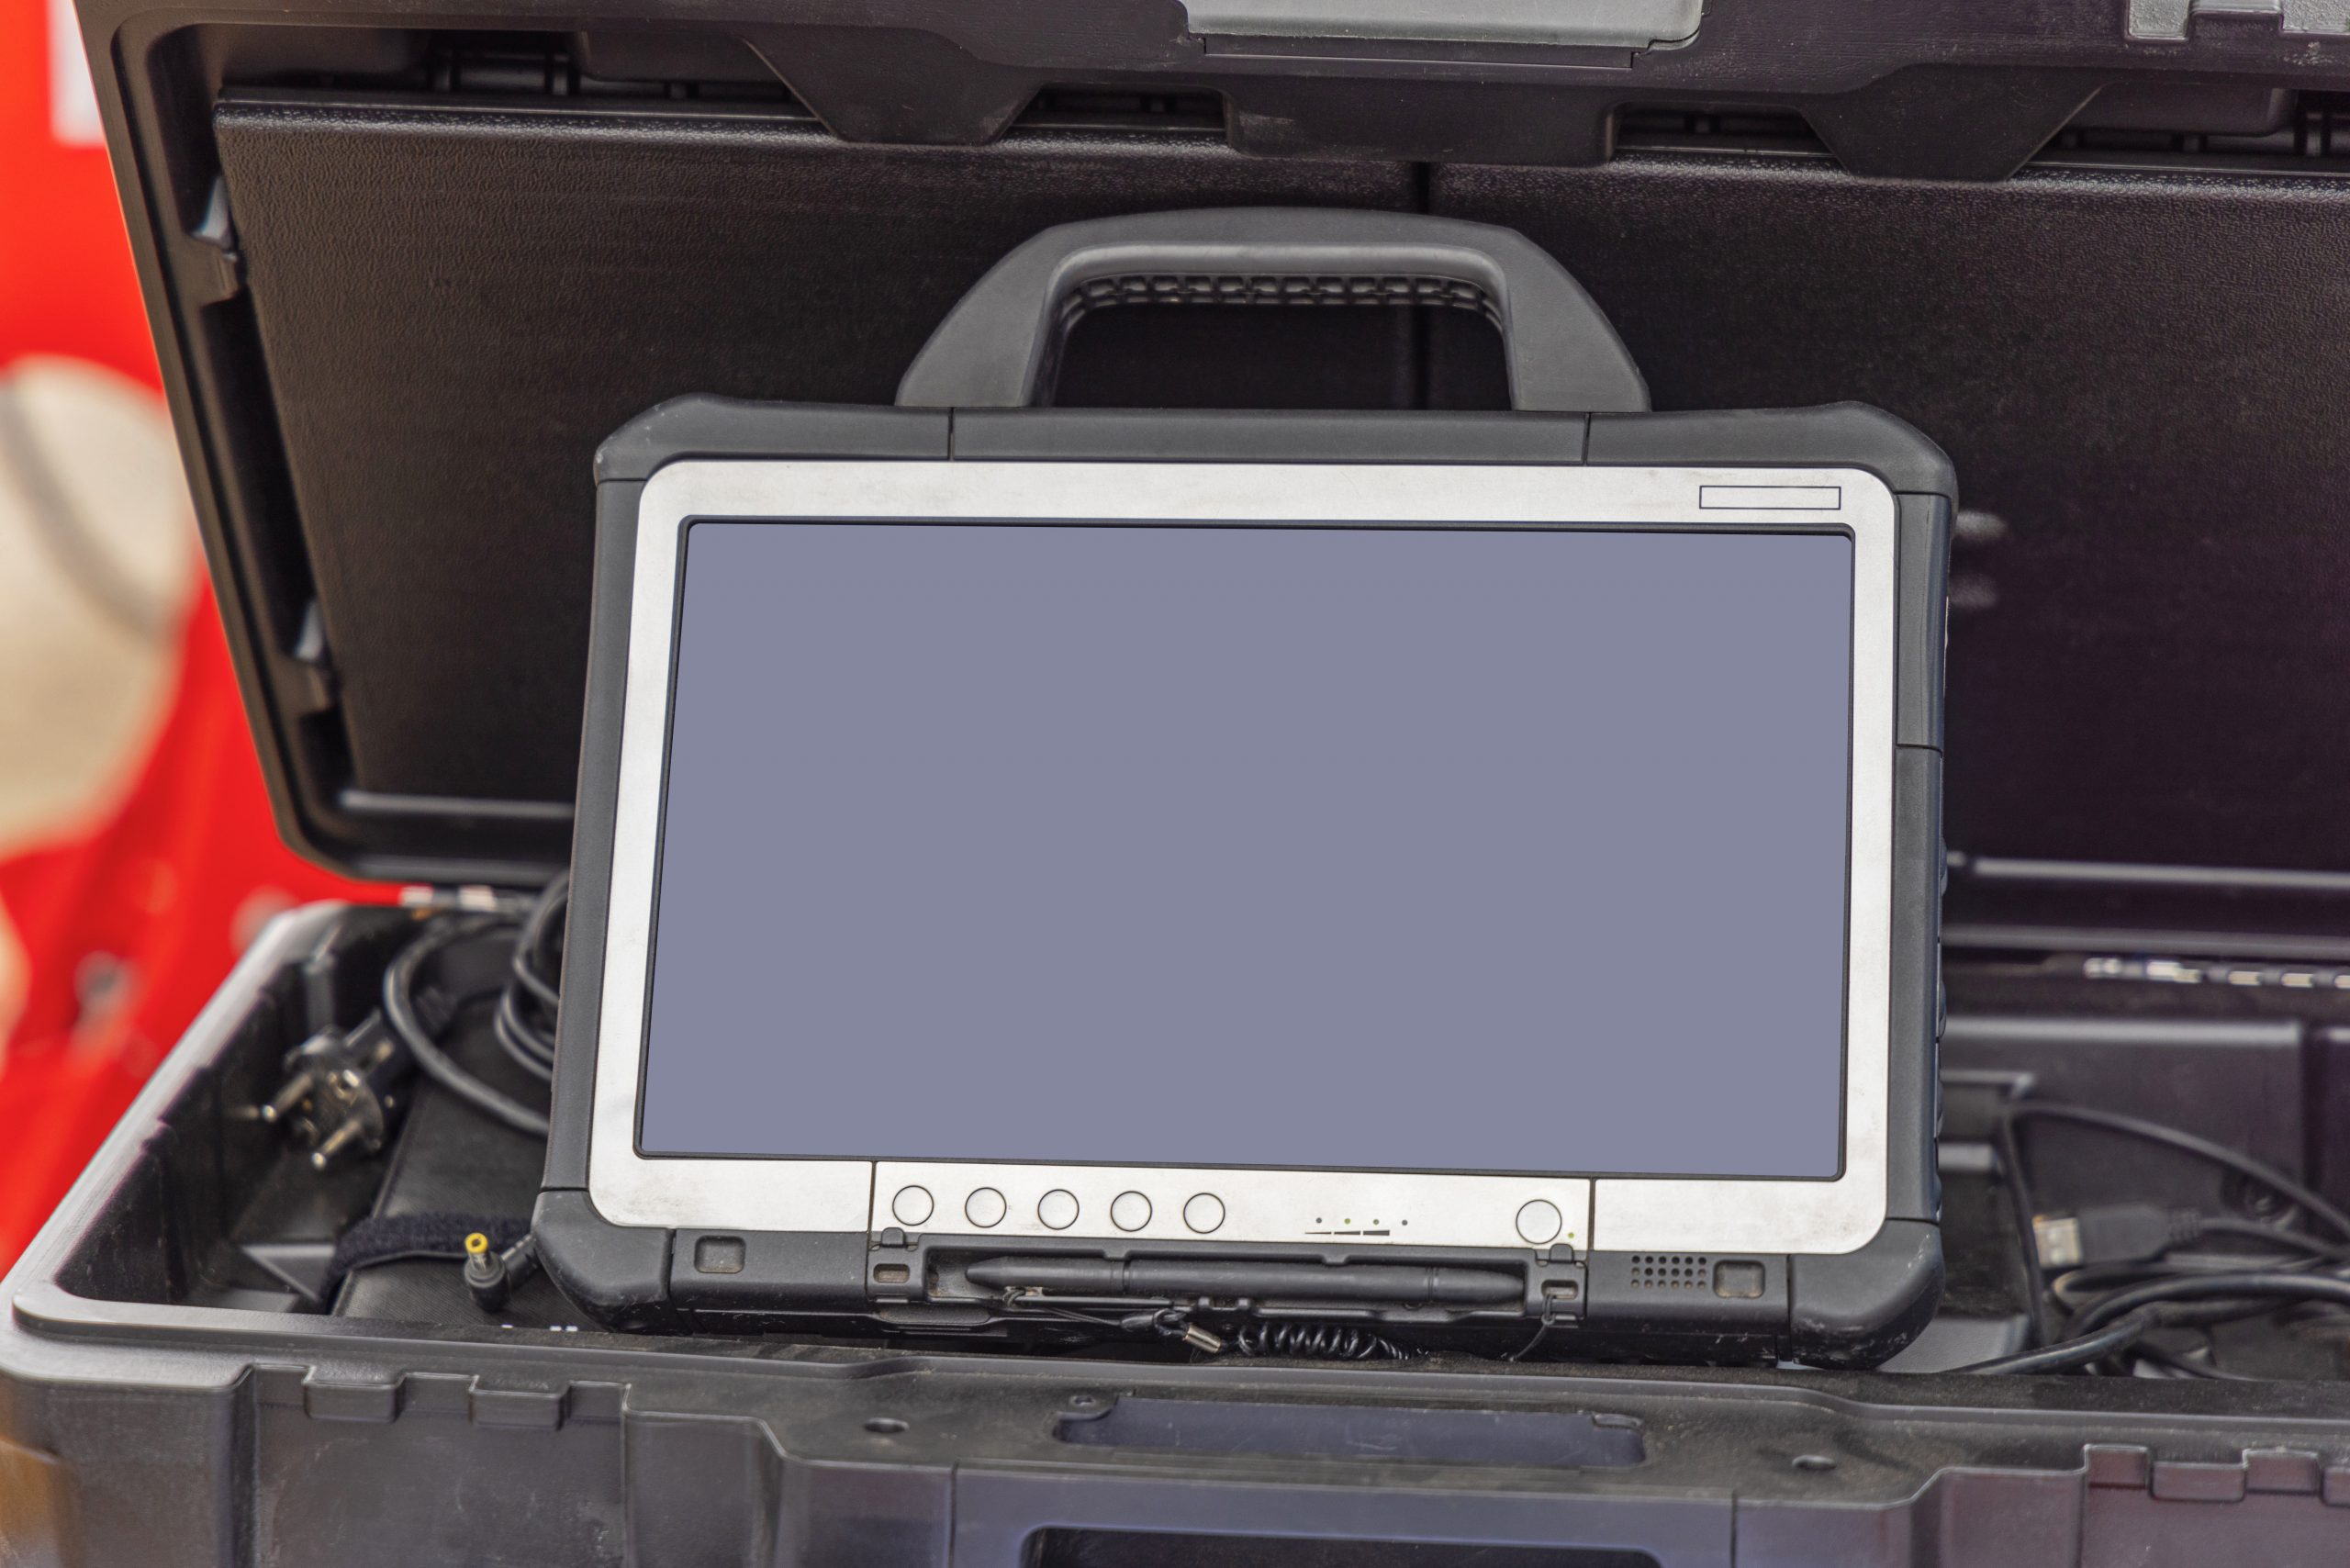 Rugged tablet with an unprotected display